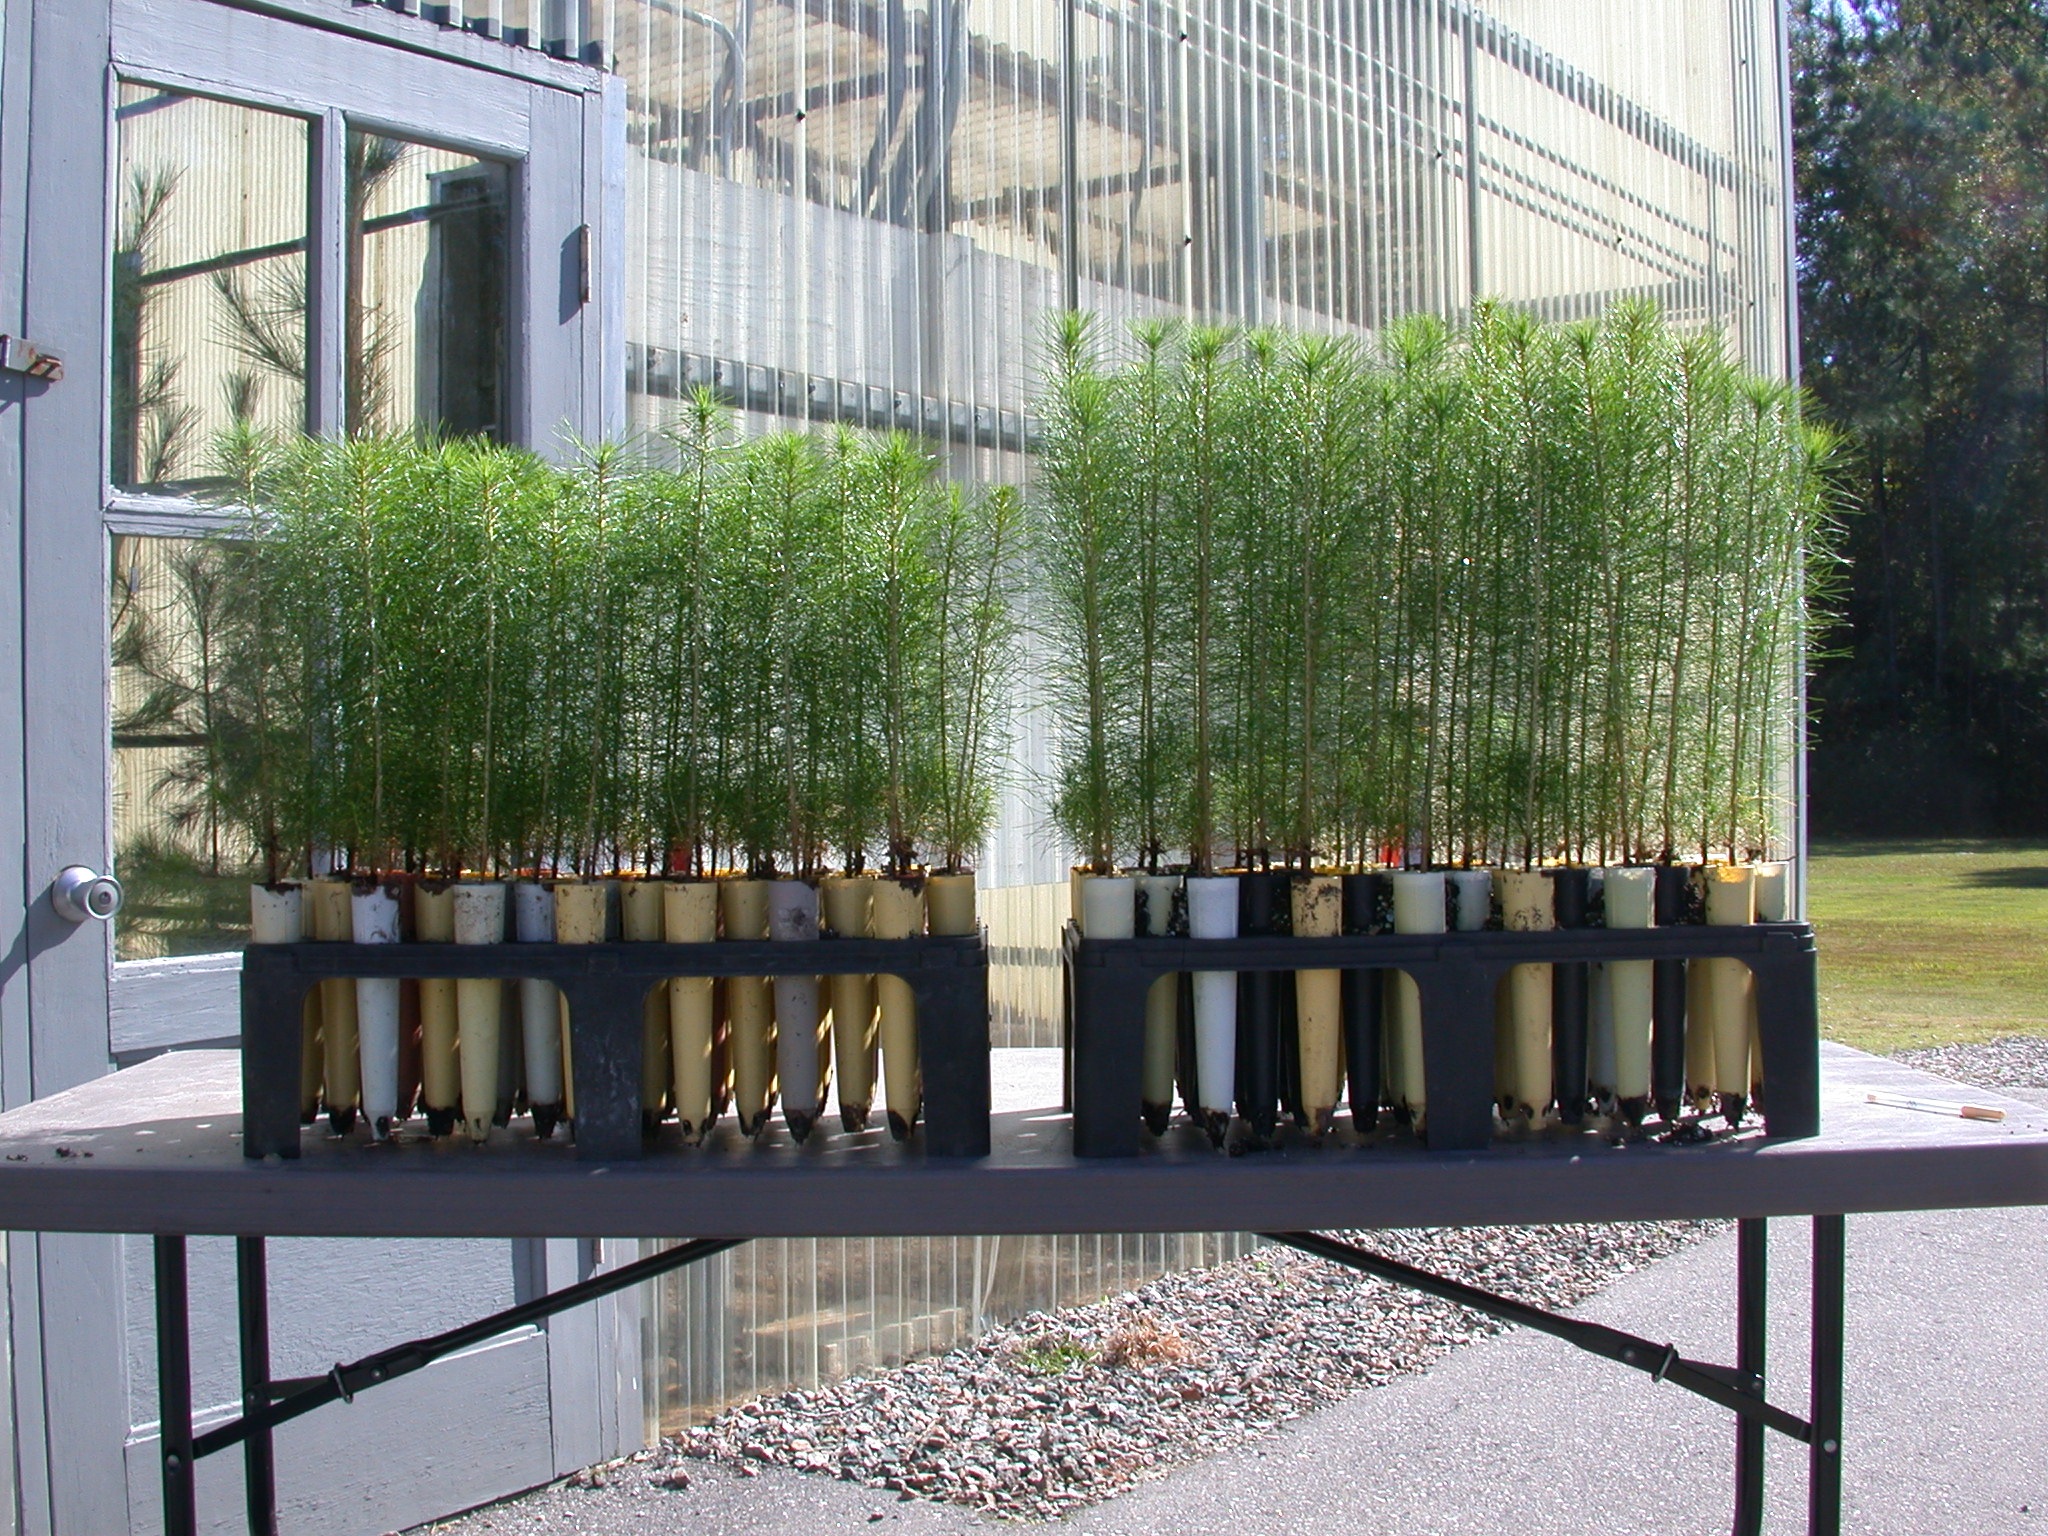 Containerized seedlings showing family differences